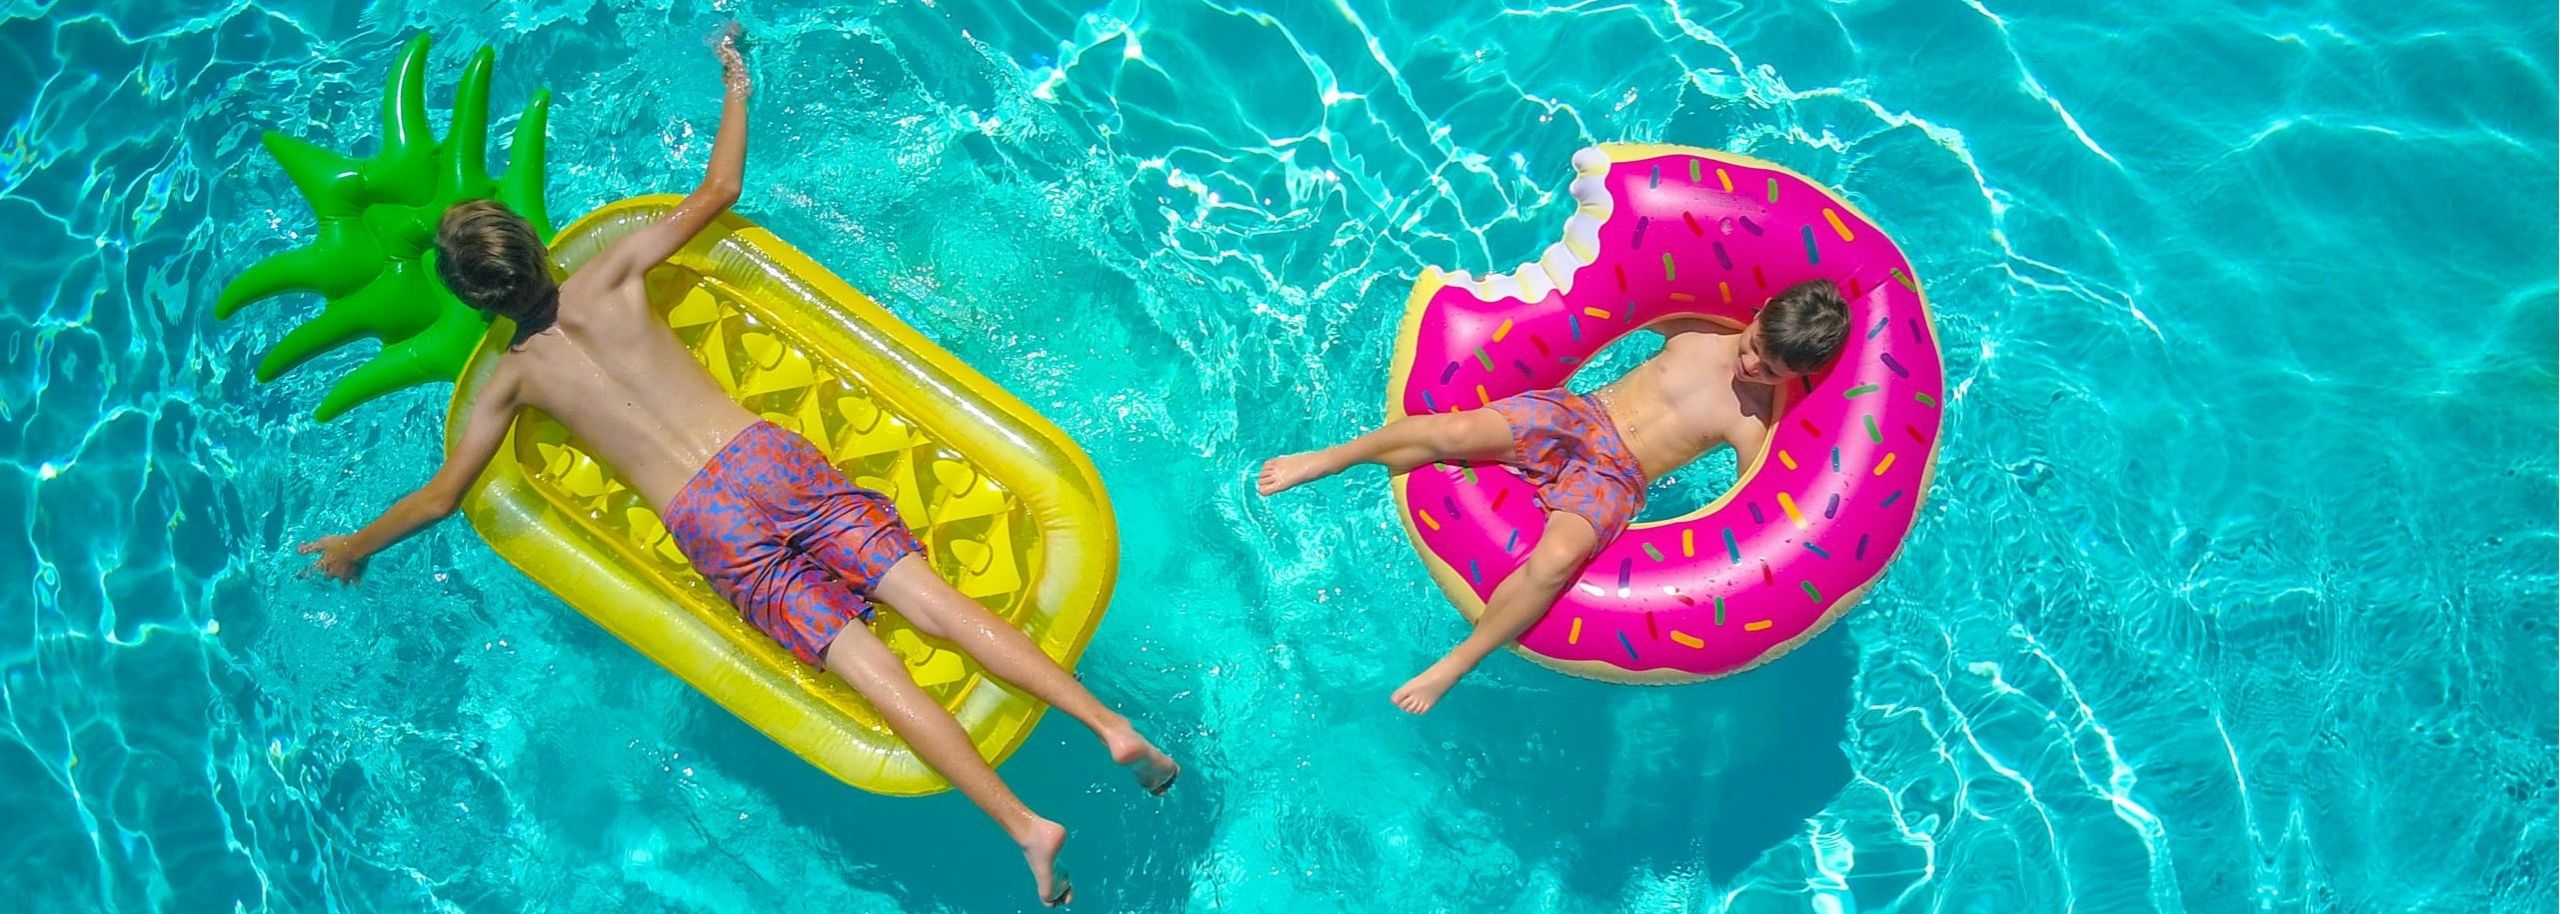 Inflatable tubes in the pool